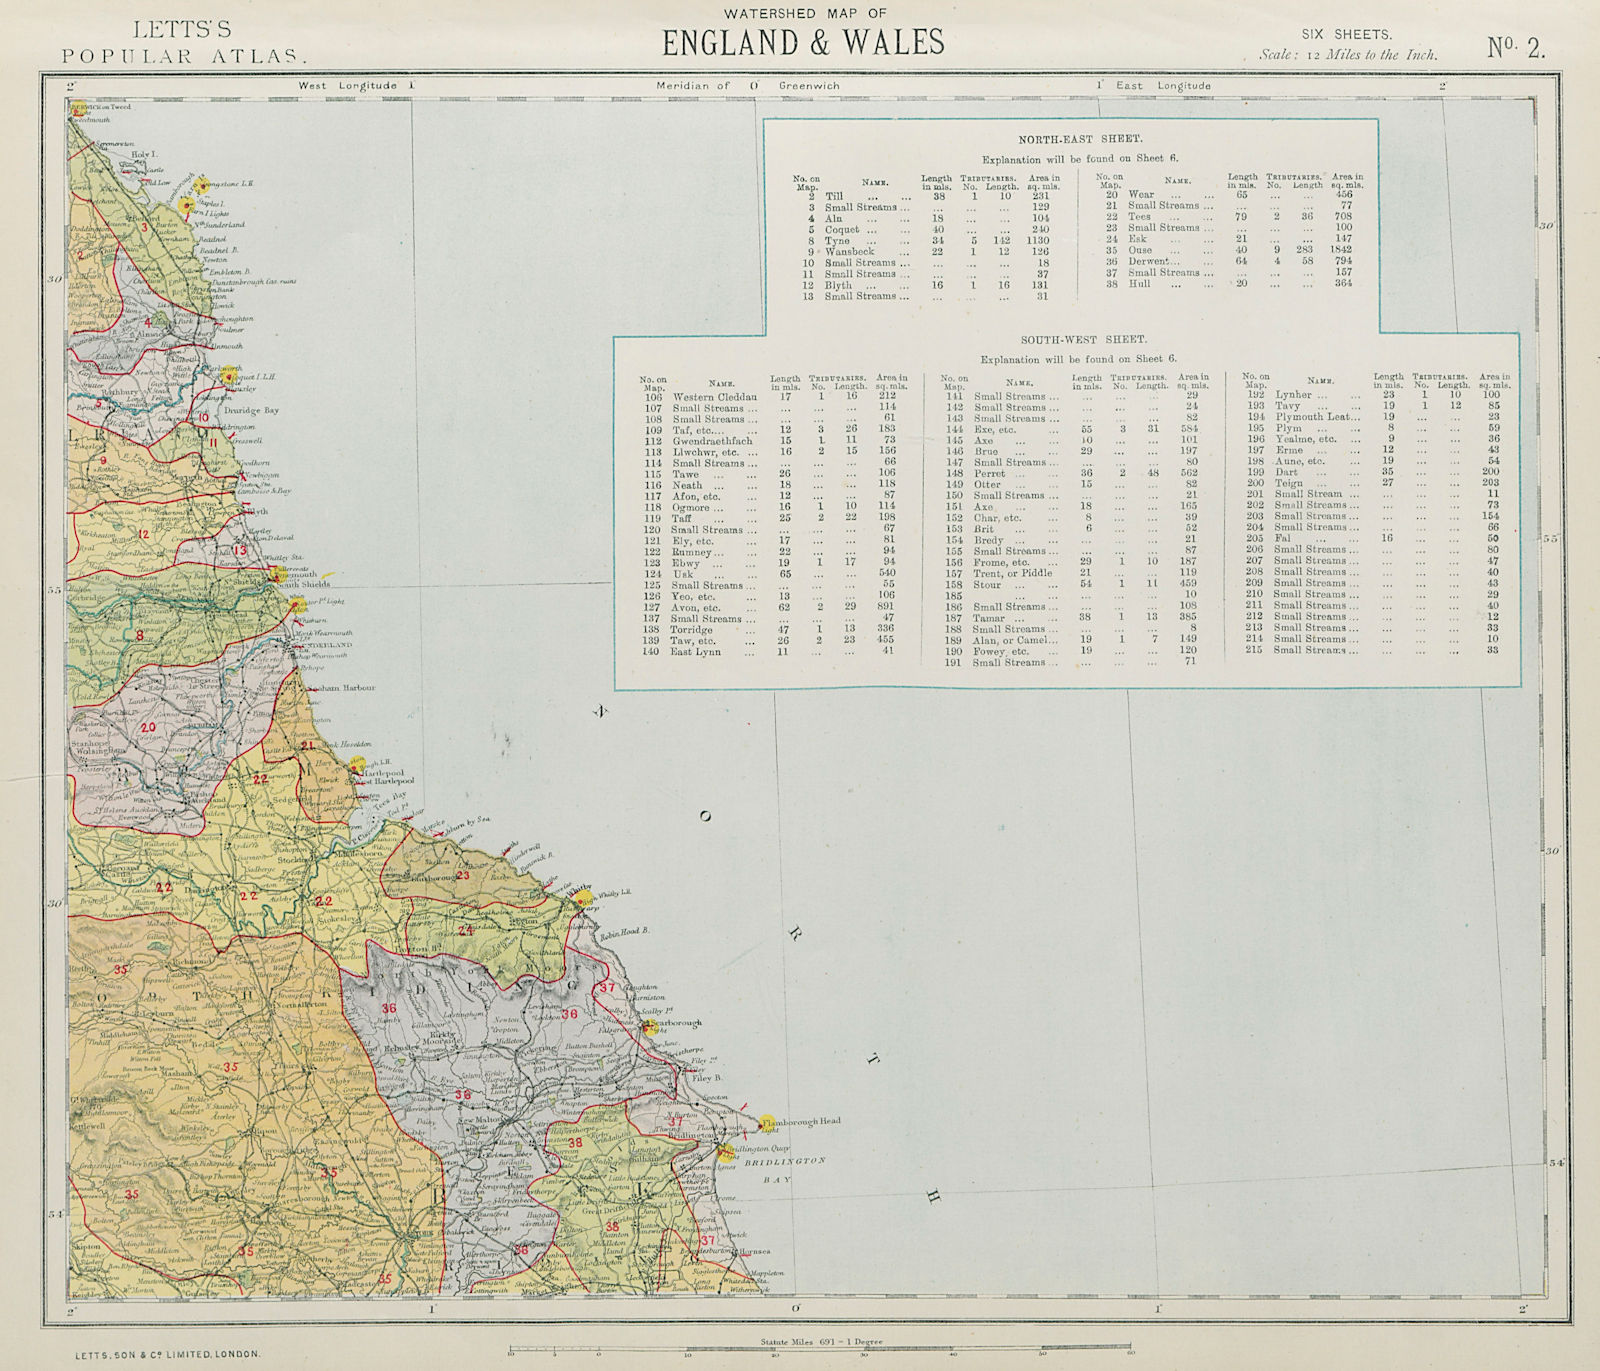 NORTH YORKSHIRE, DURHAM & NORTHUMBERLAND COAST WATERSHEDS. LETTS 1884 old map